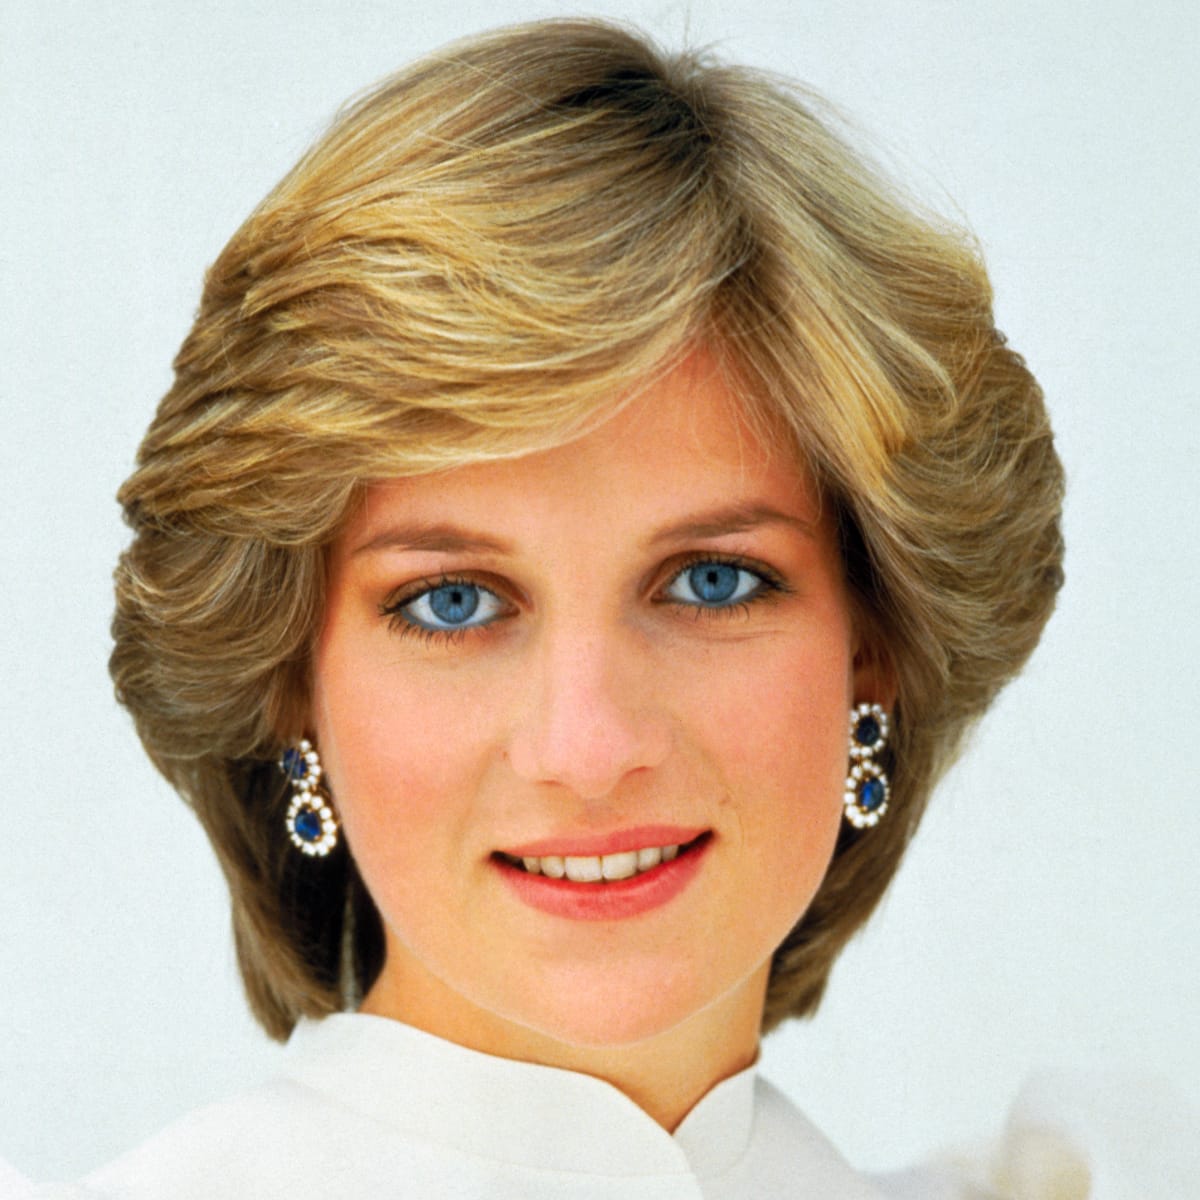 Tributes paid to princess Diana, 25 years after her death - Daily Times